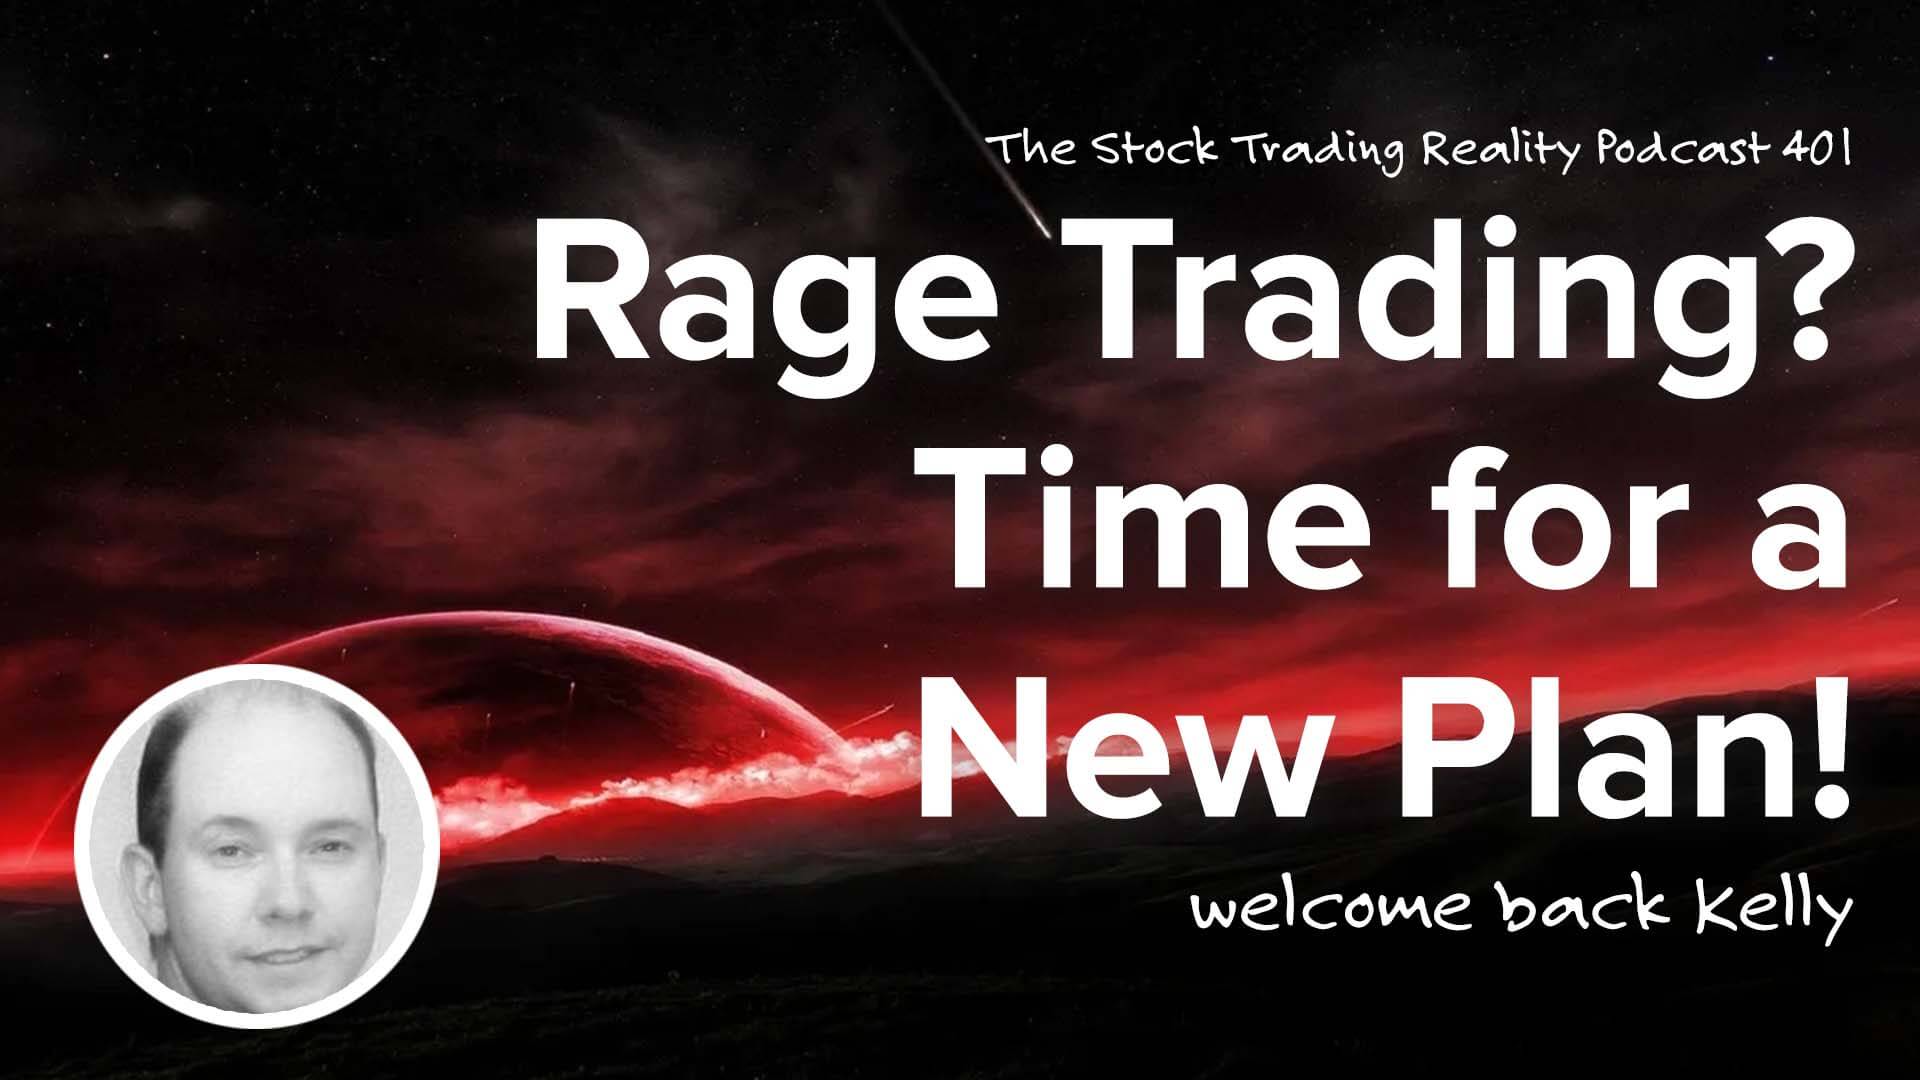 Rage Trading? Time for a New Plan! | STR 401